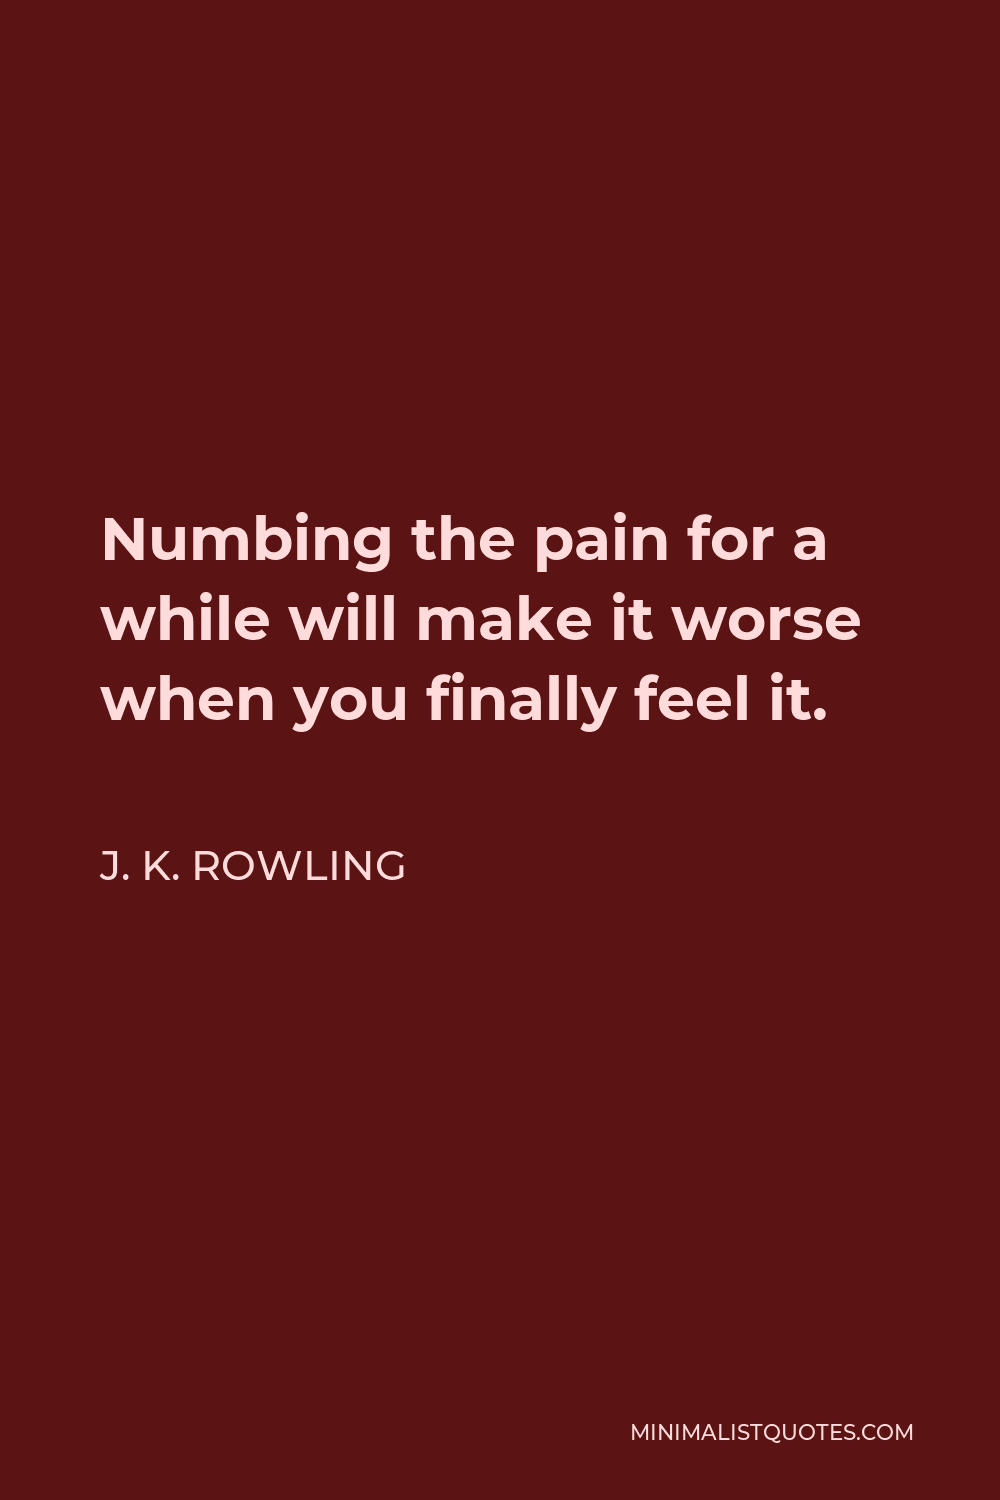 J. K. Rowling Quote - Numbing the pain for a while will make it worse when you finally feel it.